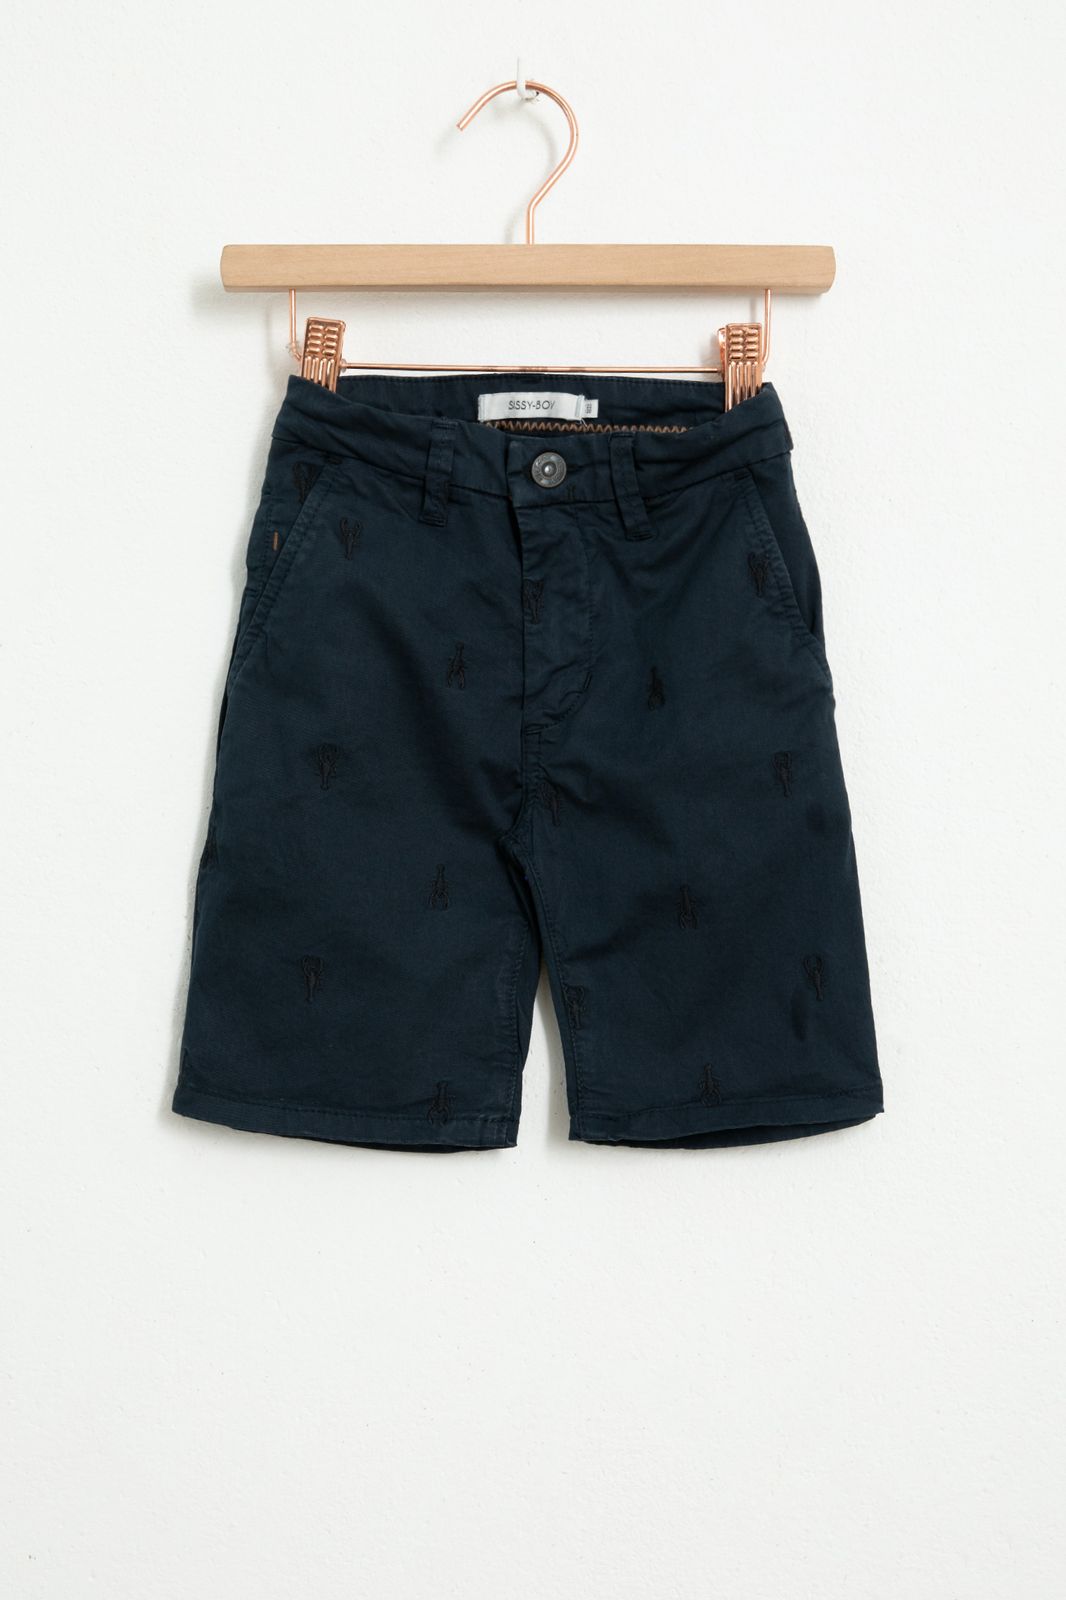 Donkerblauwe shorts met all over kreeft embroidery